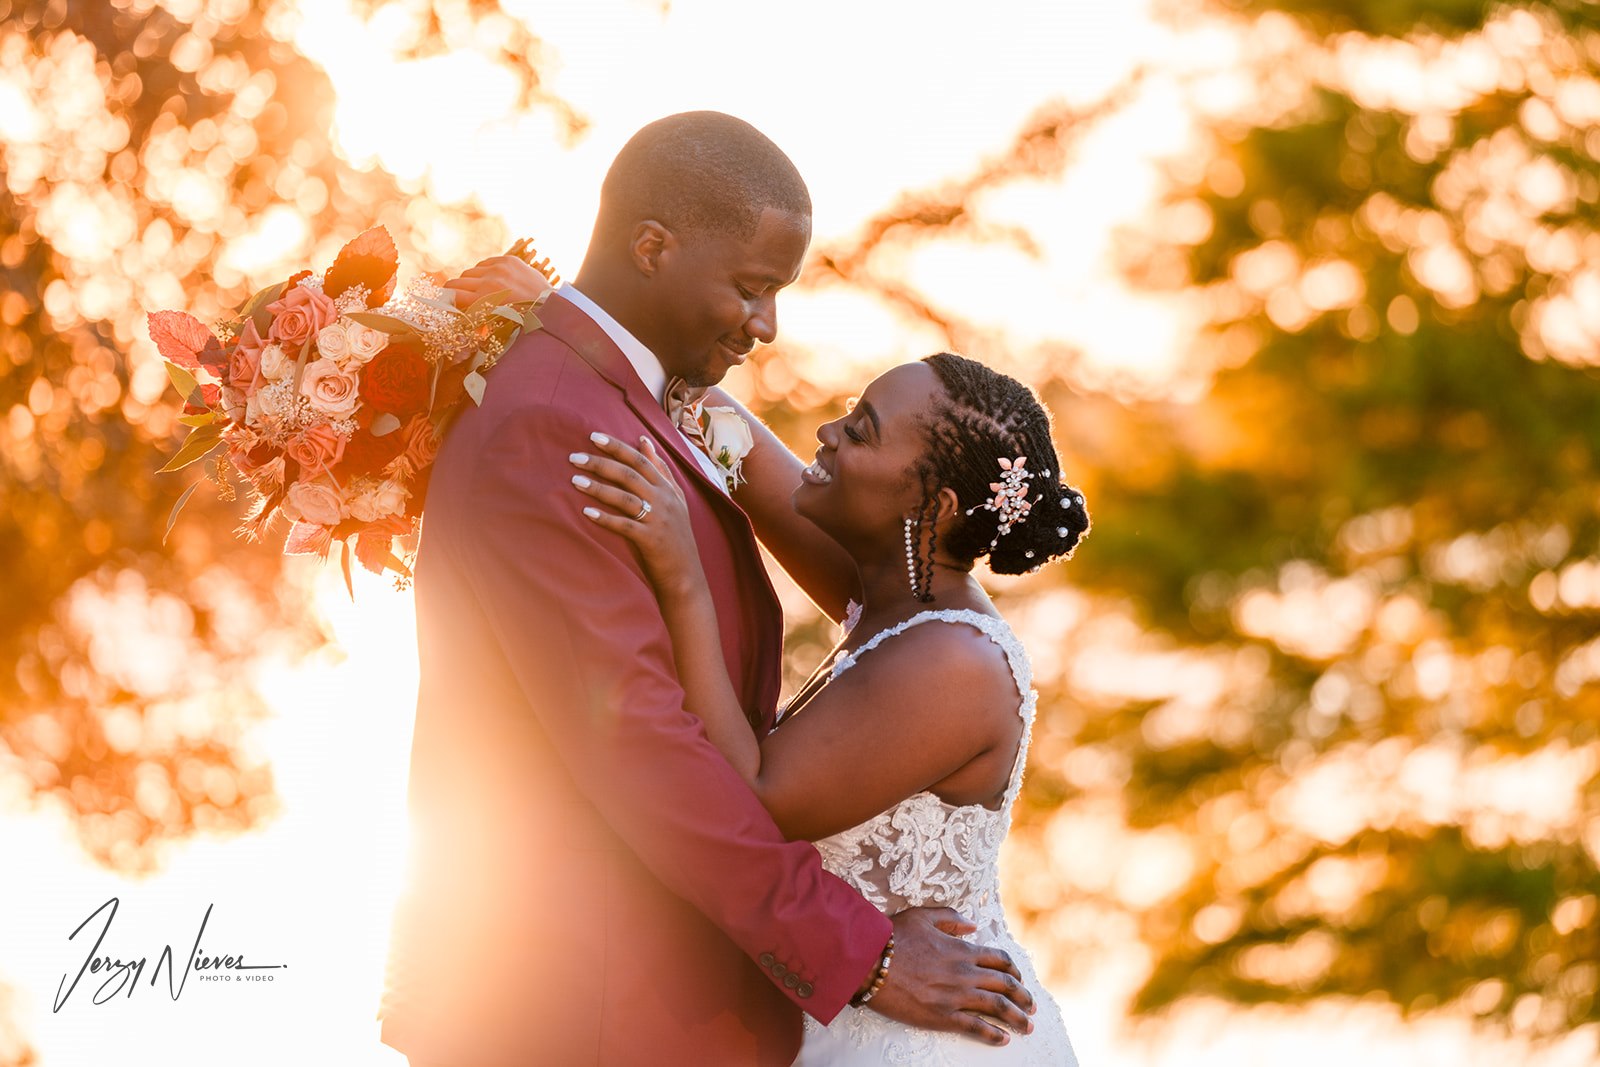 Jerzy Nieves Photography - Stylishly dressed bride and groom sharing a passionate kiss, showcasing their love and fashion-forward elegance at All Inclusive Weddings Orlando